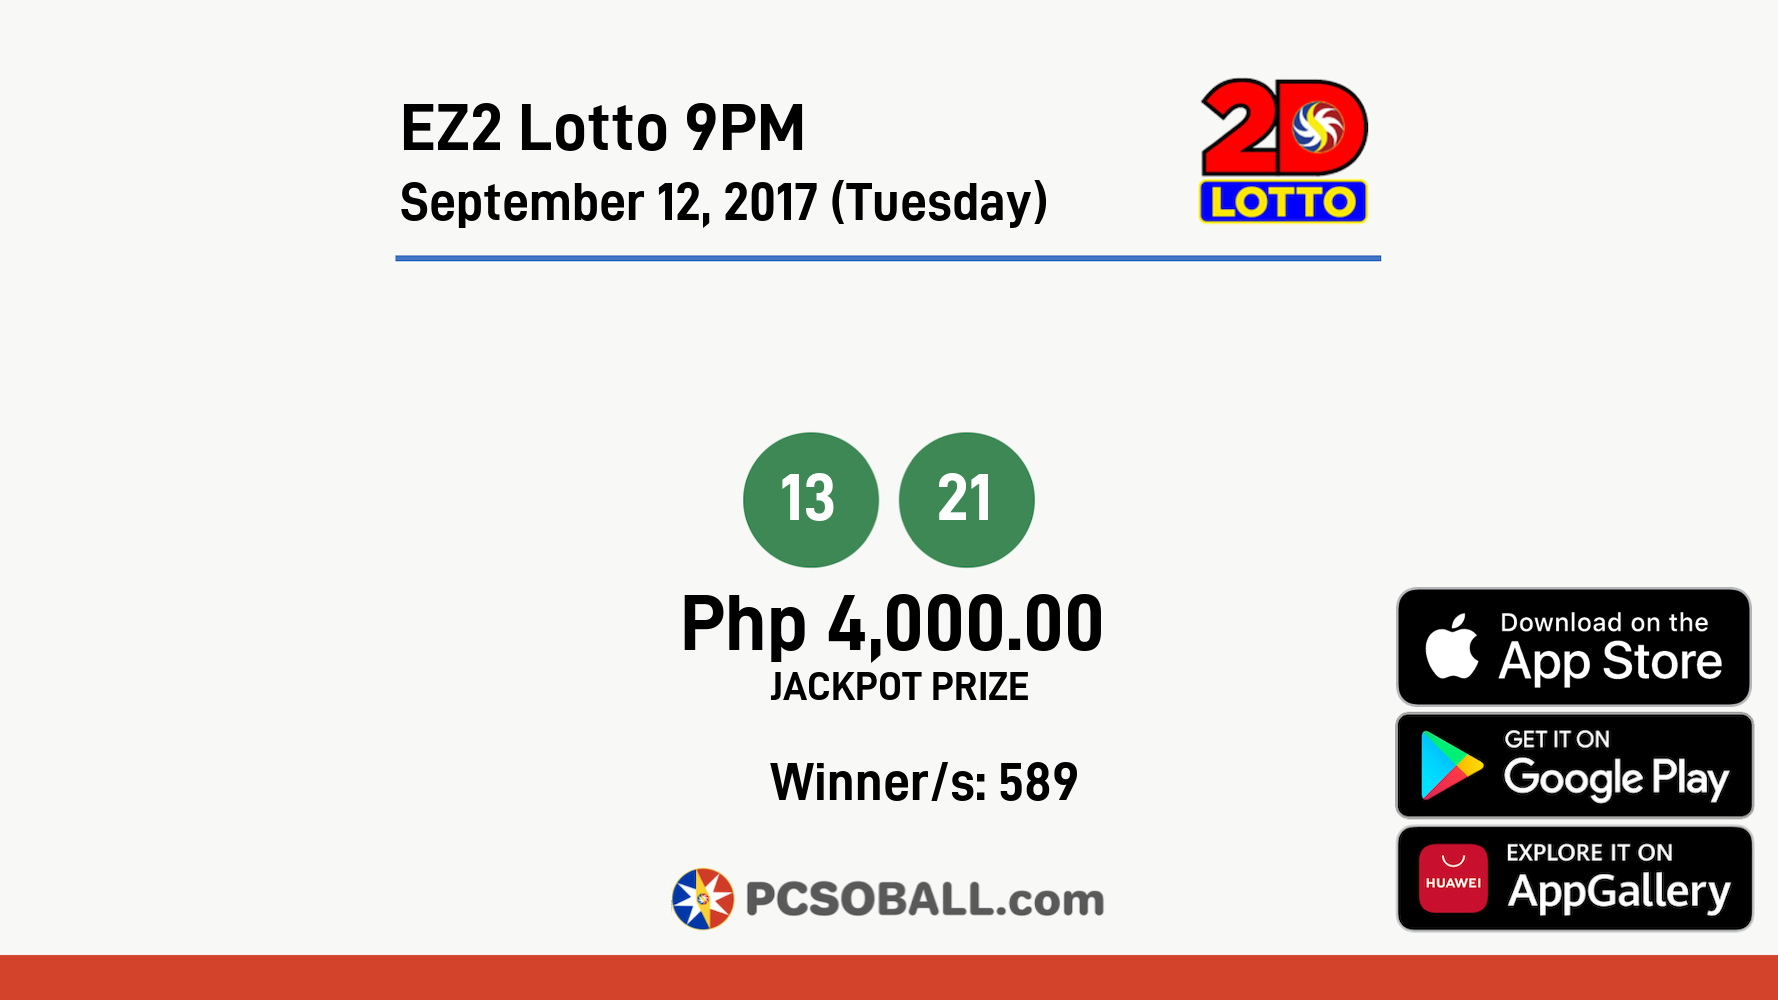 EZ2 Lotto 9PM September 12, 2017 (Tuesday) Result